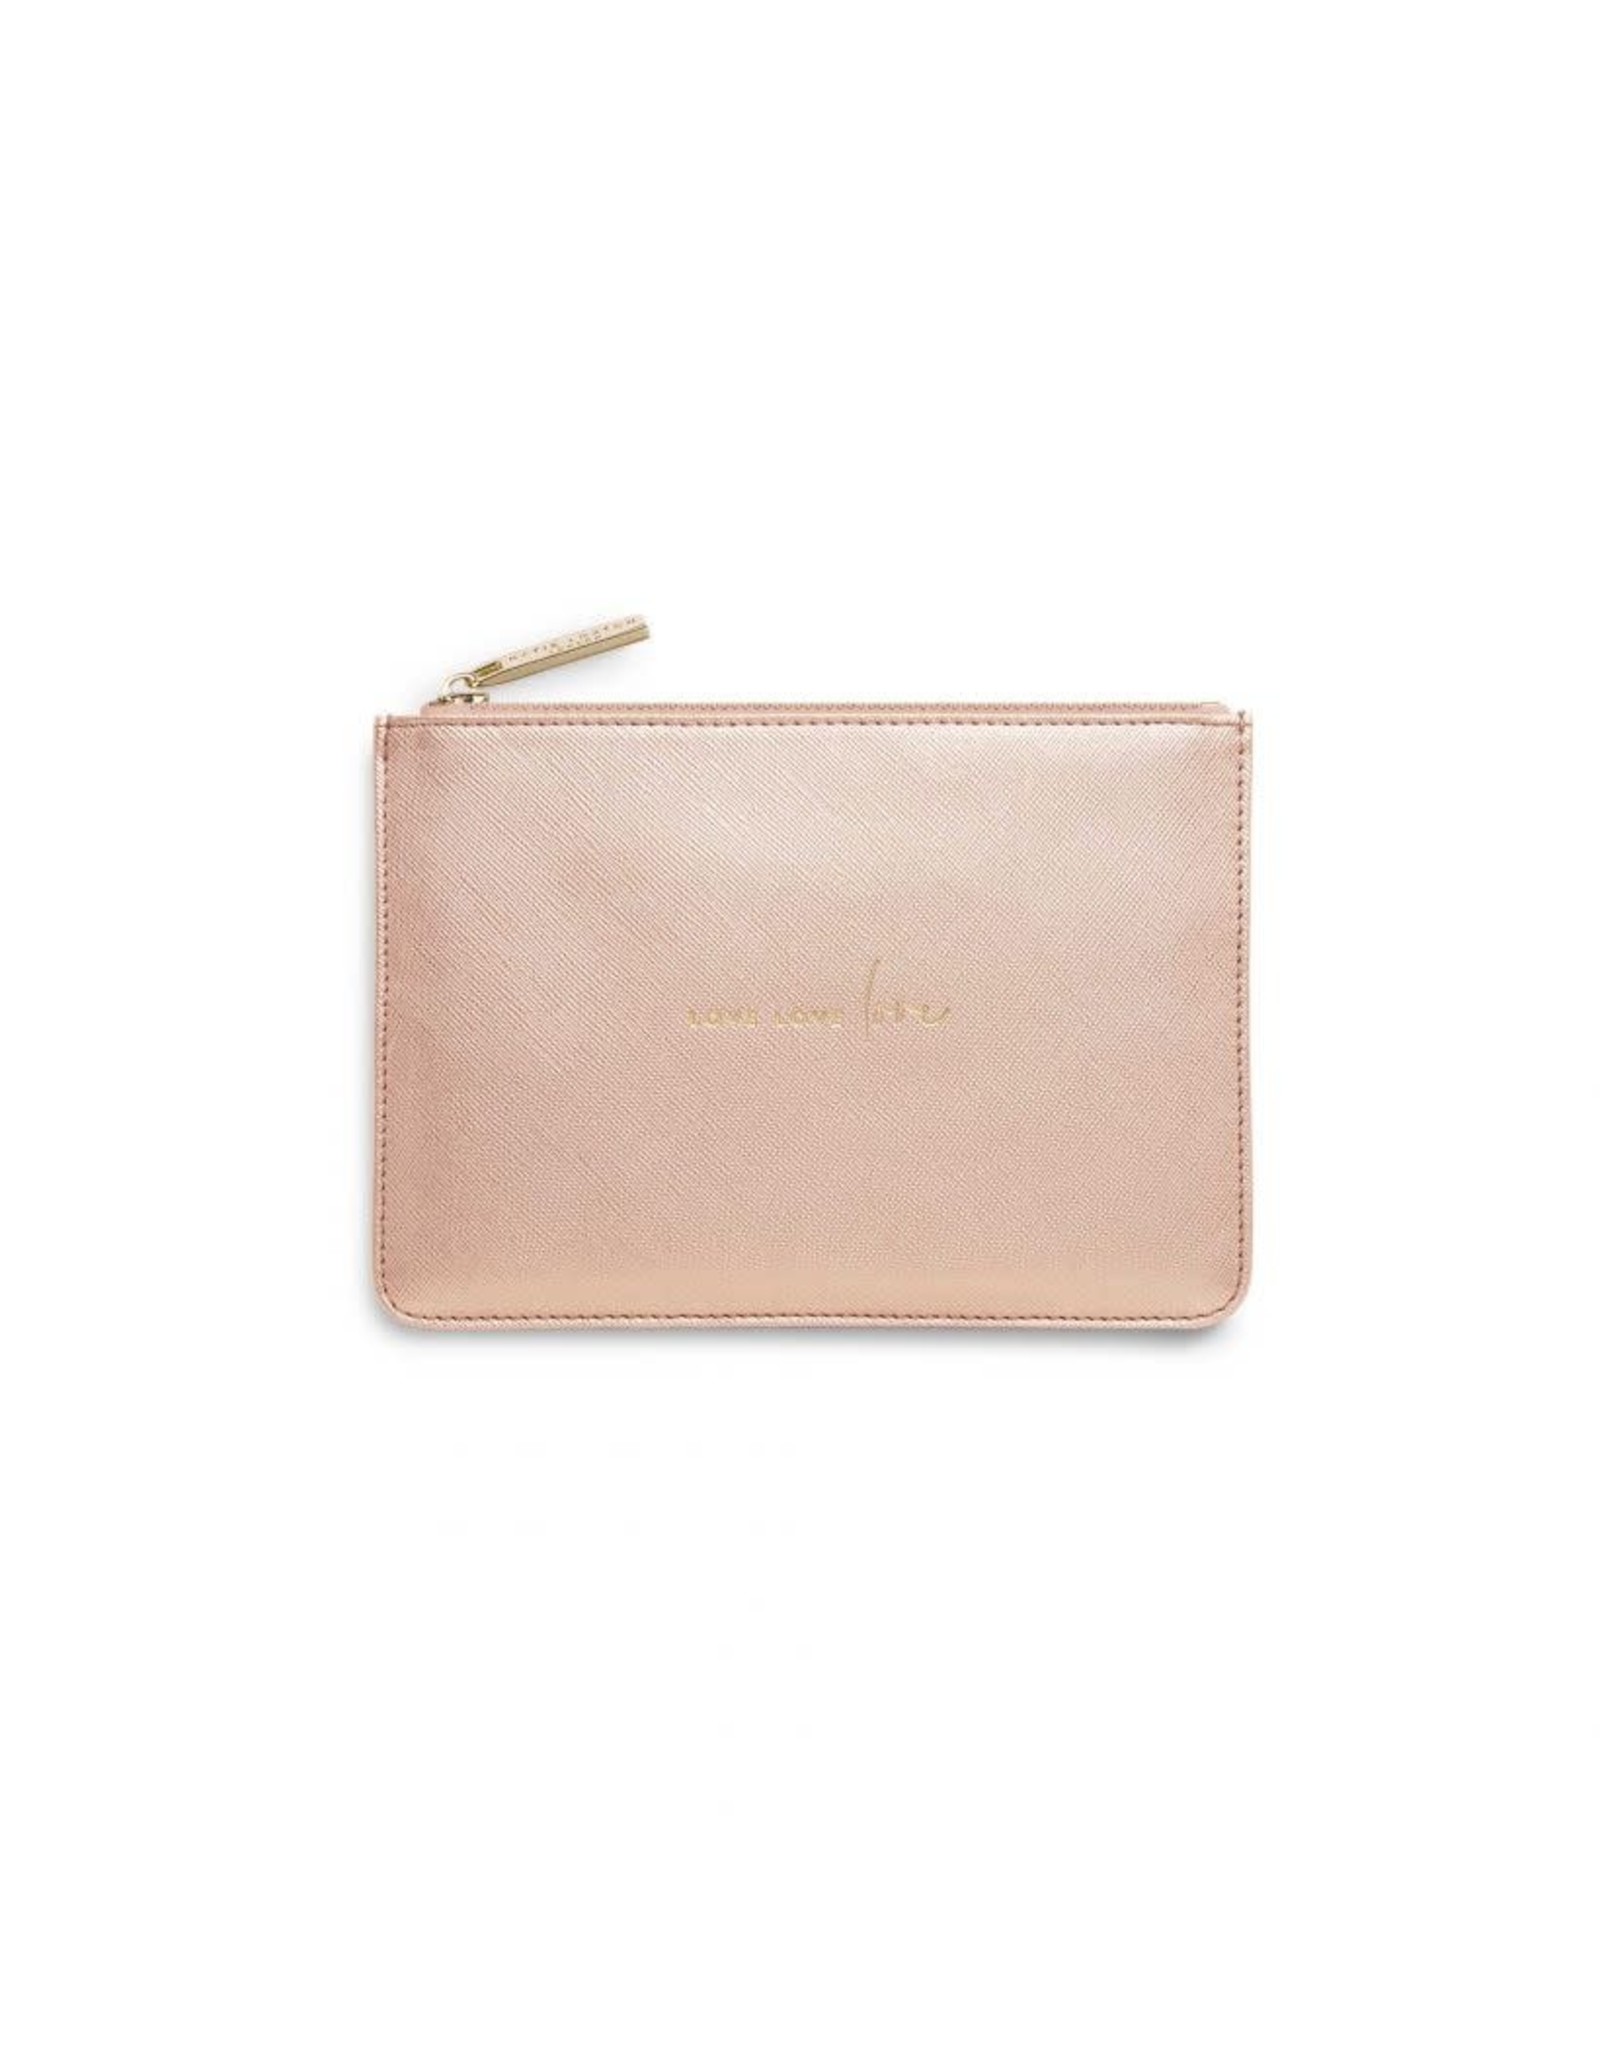 Katie Loxton Perfect Pouch Giftset - Love Love Love